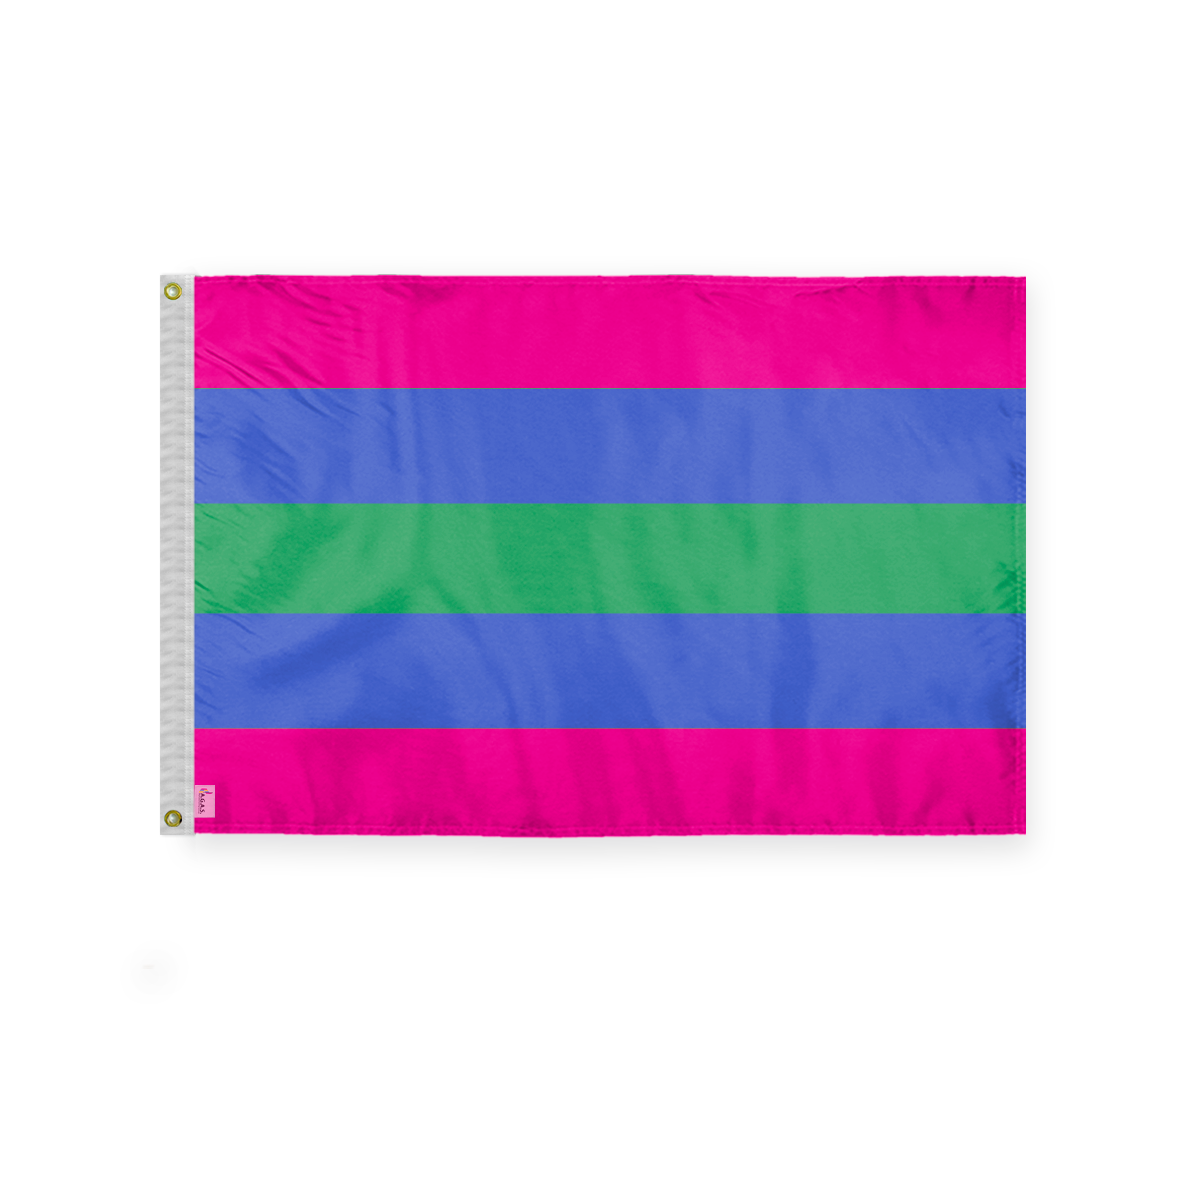 AGAS Trigender Pride Flag 3x5 Ft - Double Sided Polyester